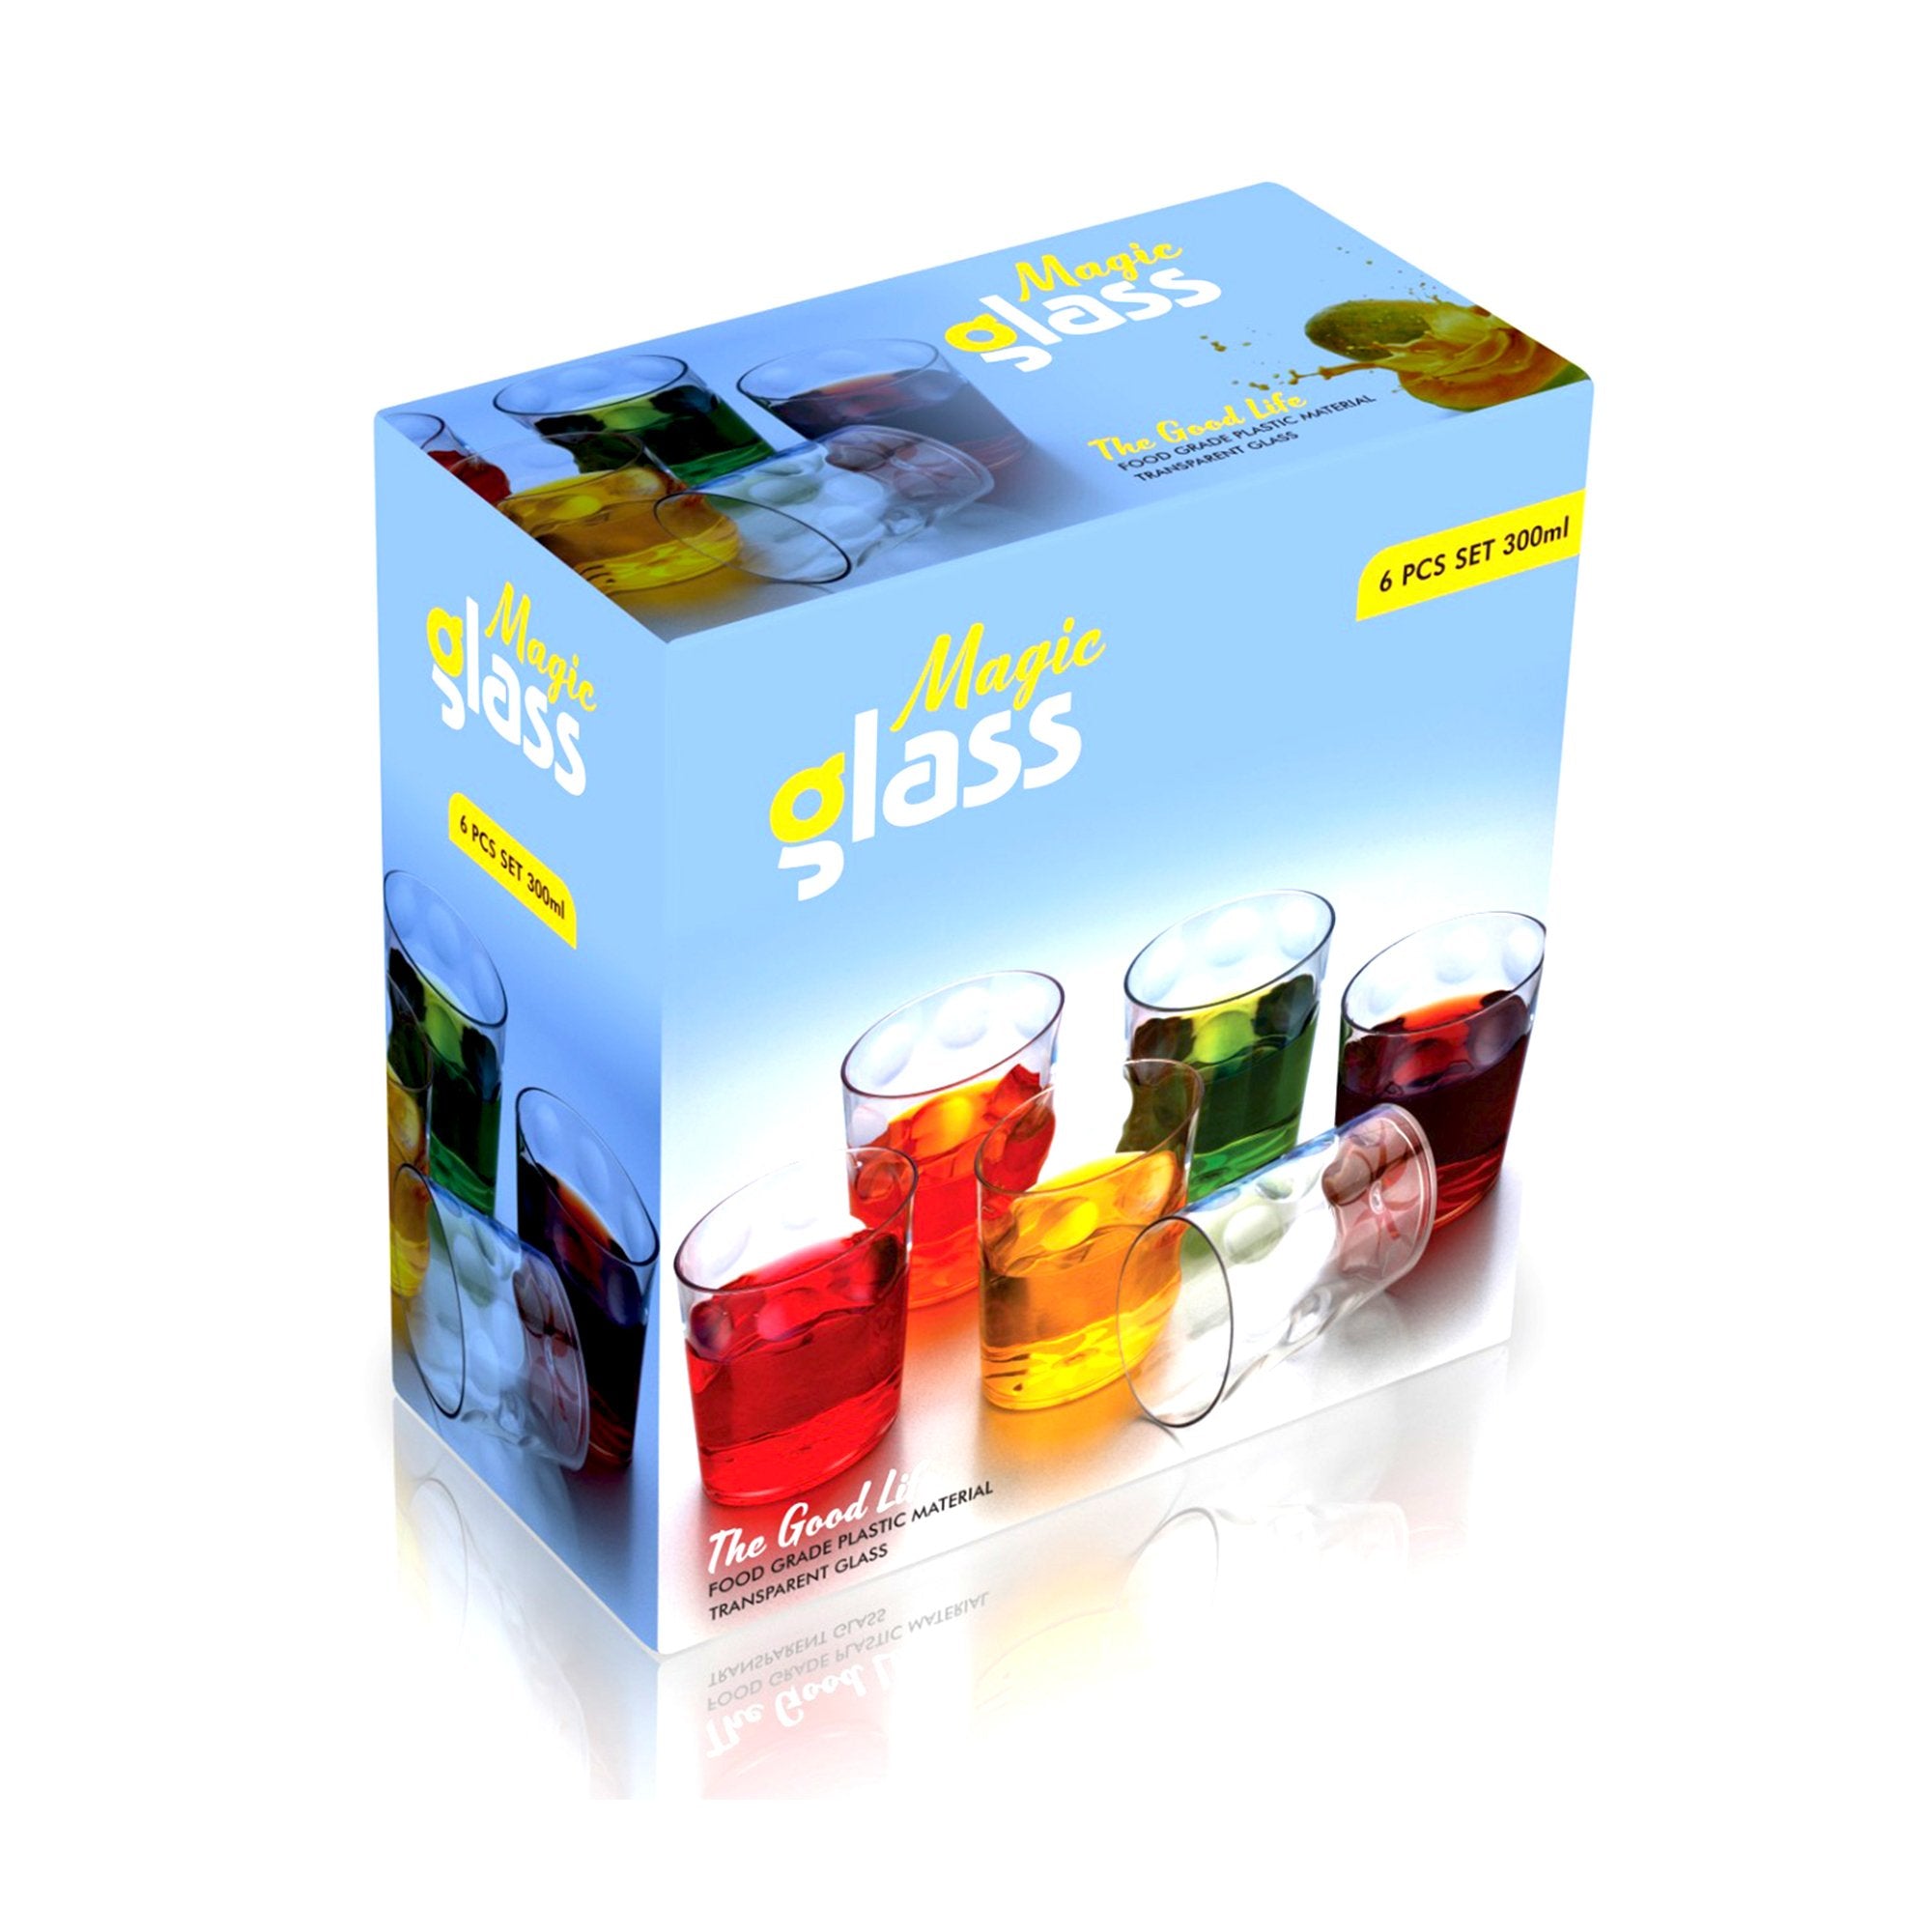 2340 Multi Purpose Unbreakable Drinking Glass (Set of 6 Pieces) (300ml) - SkyShopy